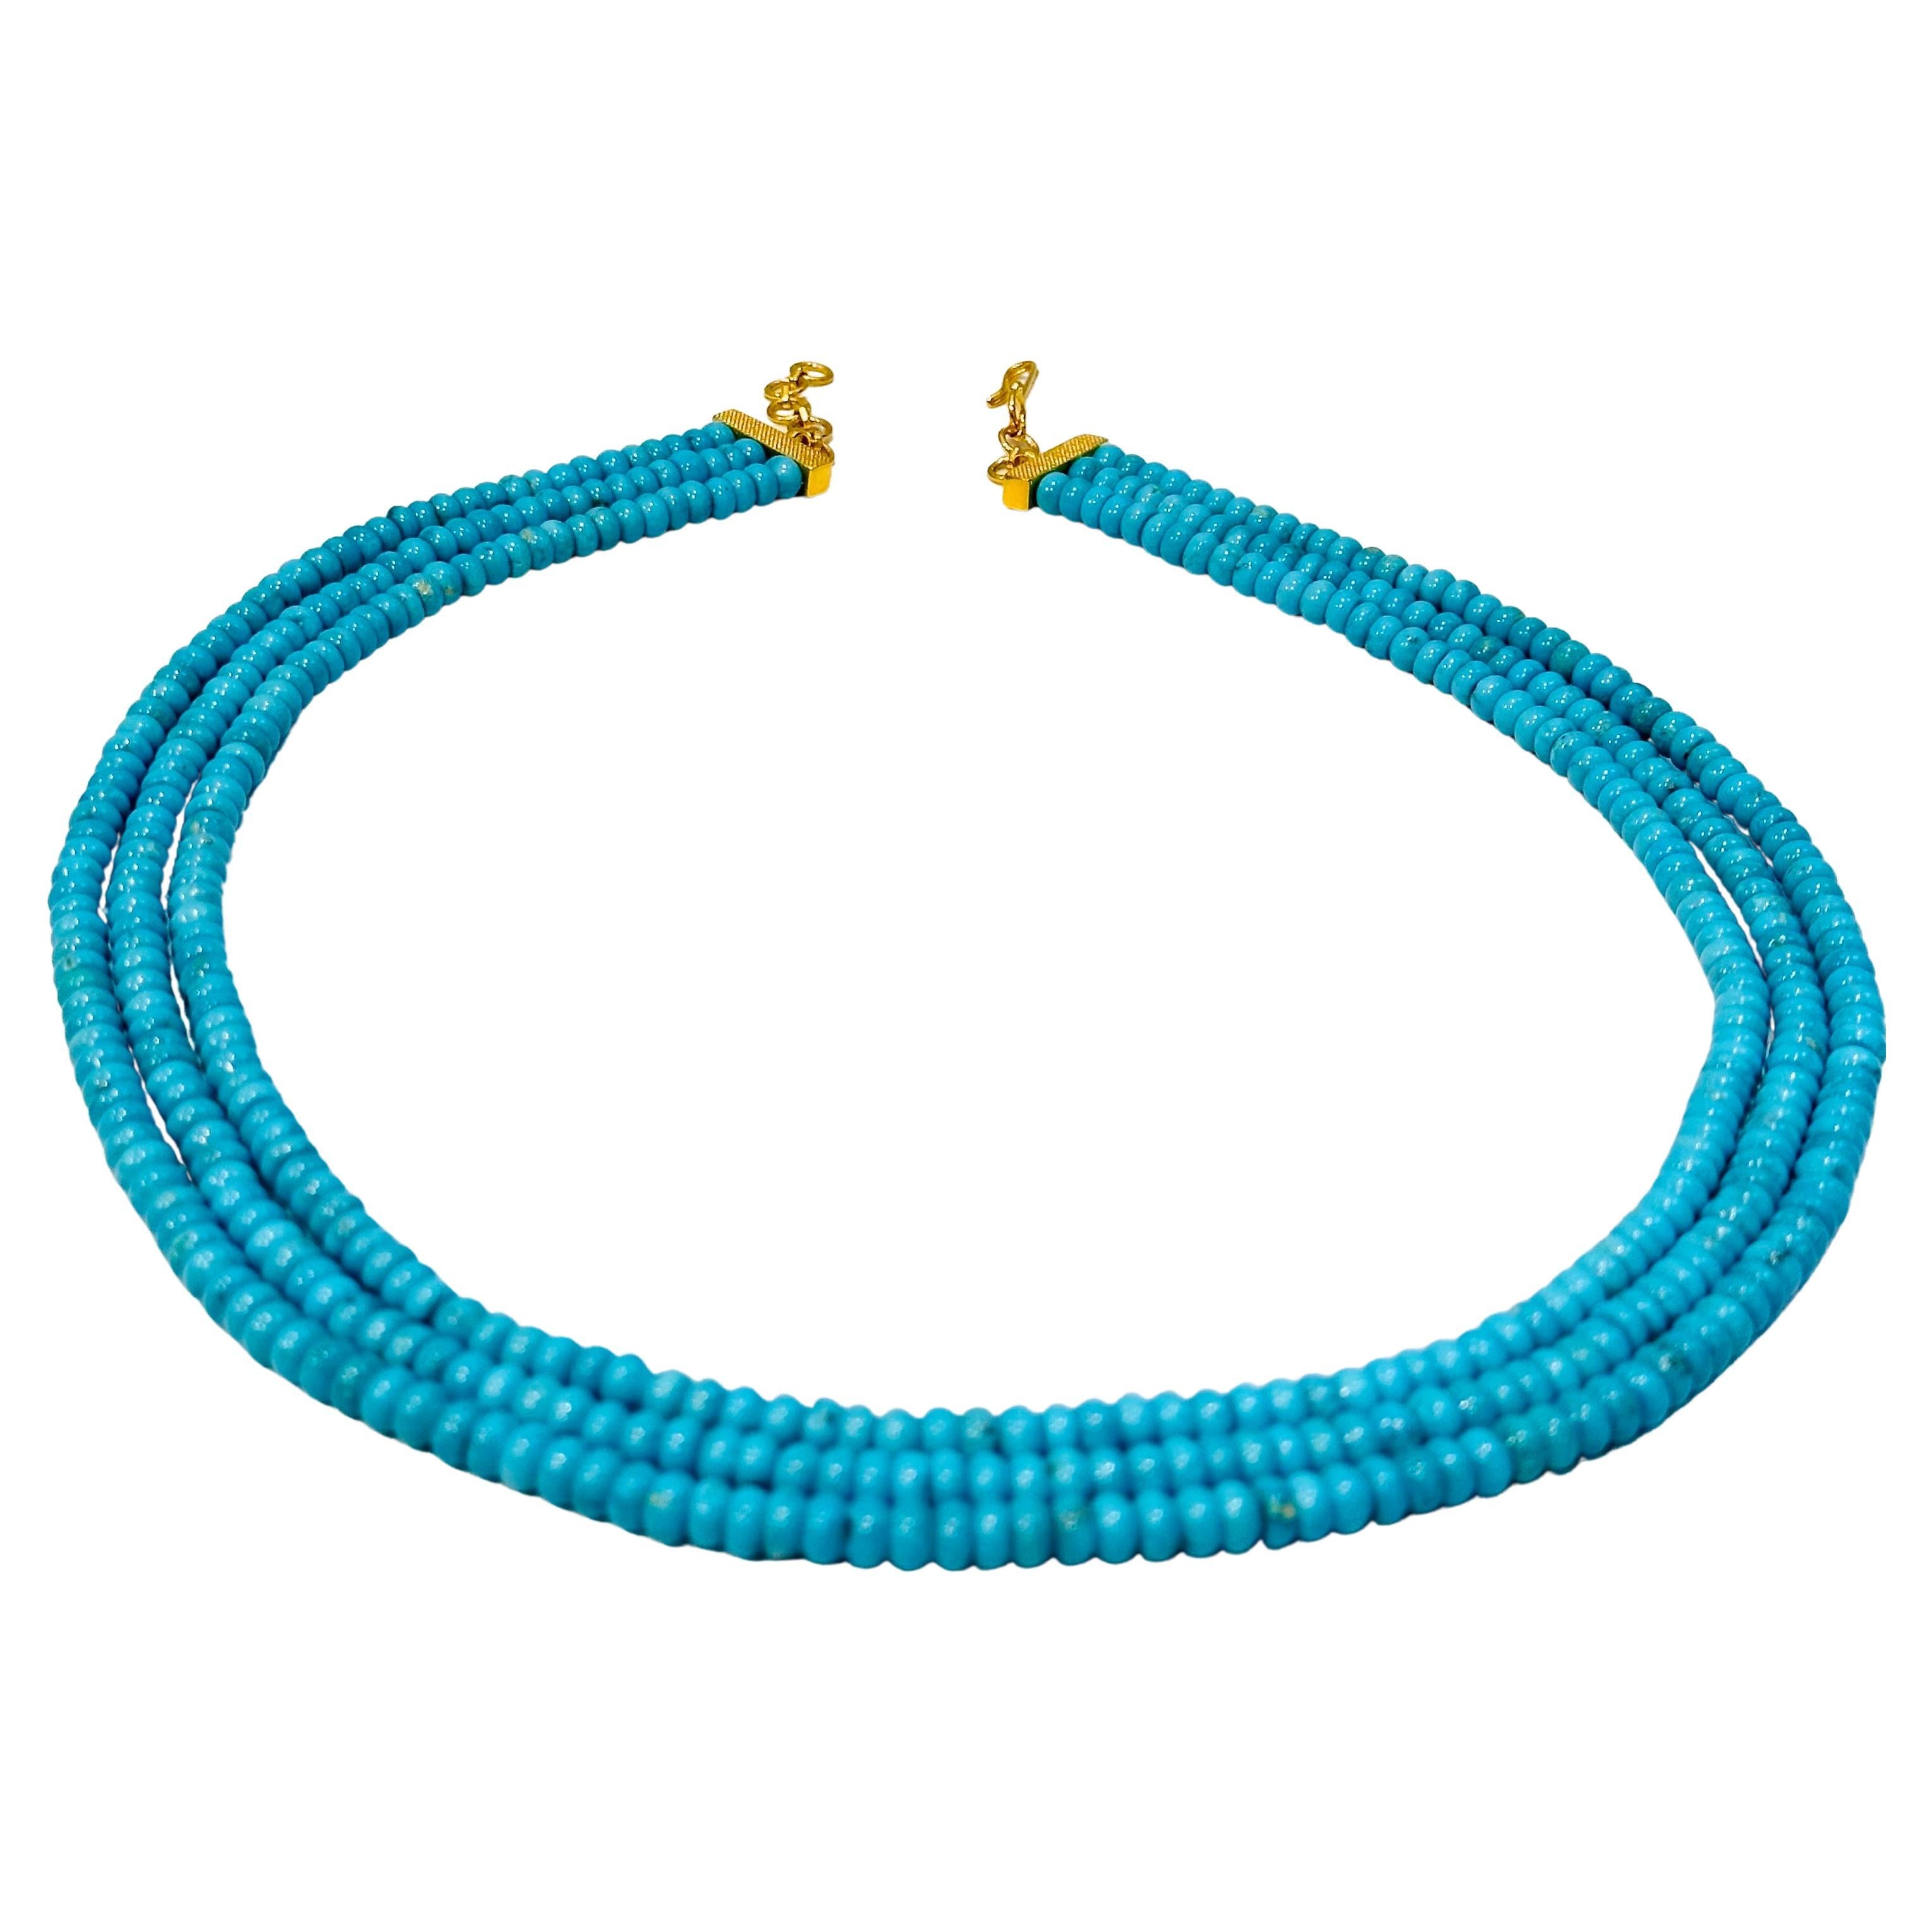 345 Carat Natural Sleeping Beauty Turquoise Necklace, Three Strand 14 Karat Gold
Natural Sleeping Beauty Turquoise which is very hard to find now.
Necklace has 3 strand
Approximately 5 mm each bead
20 Inch long 
14 Karat  Yellow gold clasp
Please